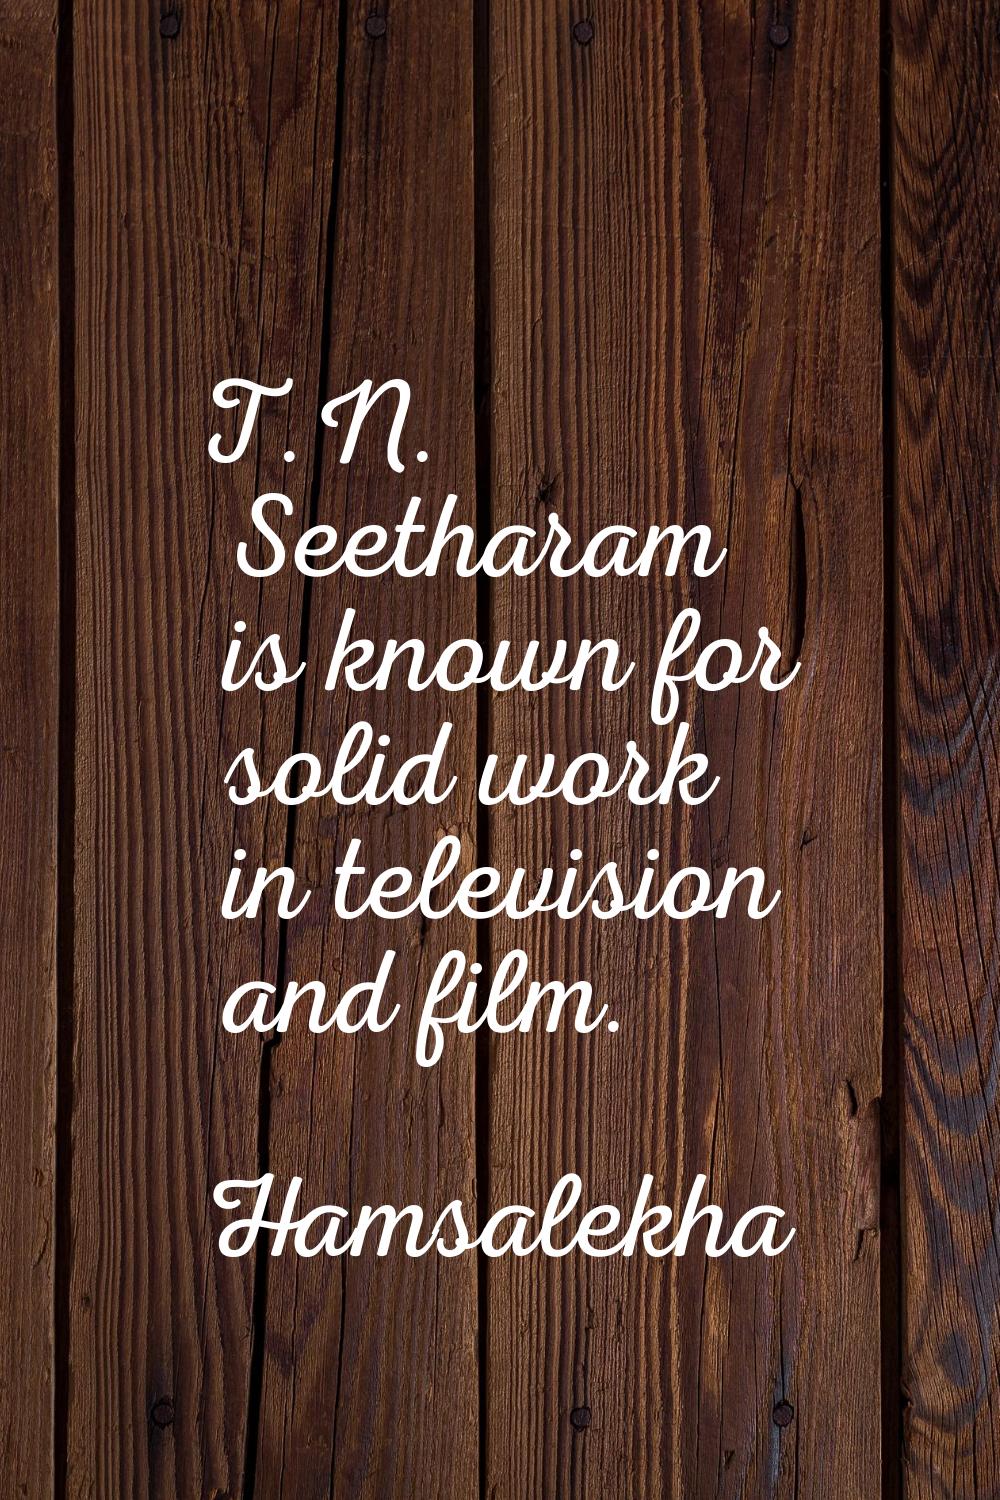 T.N. Seetharam is known for solid work in television and film.